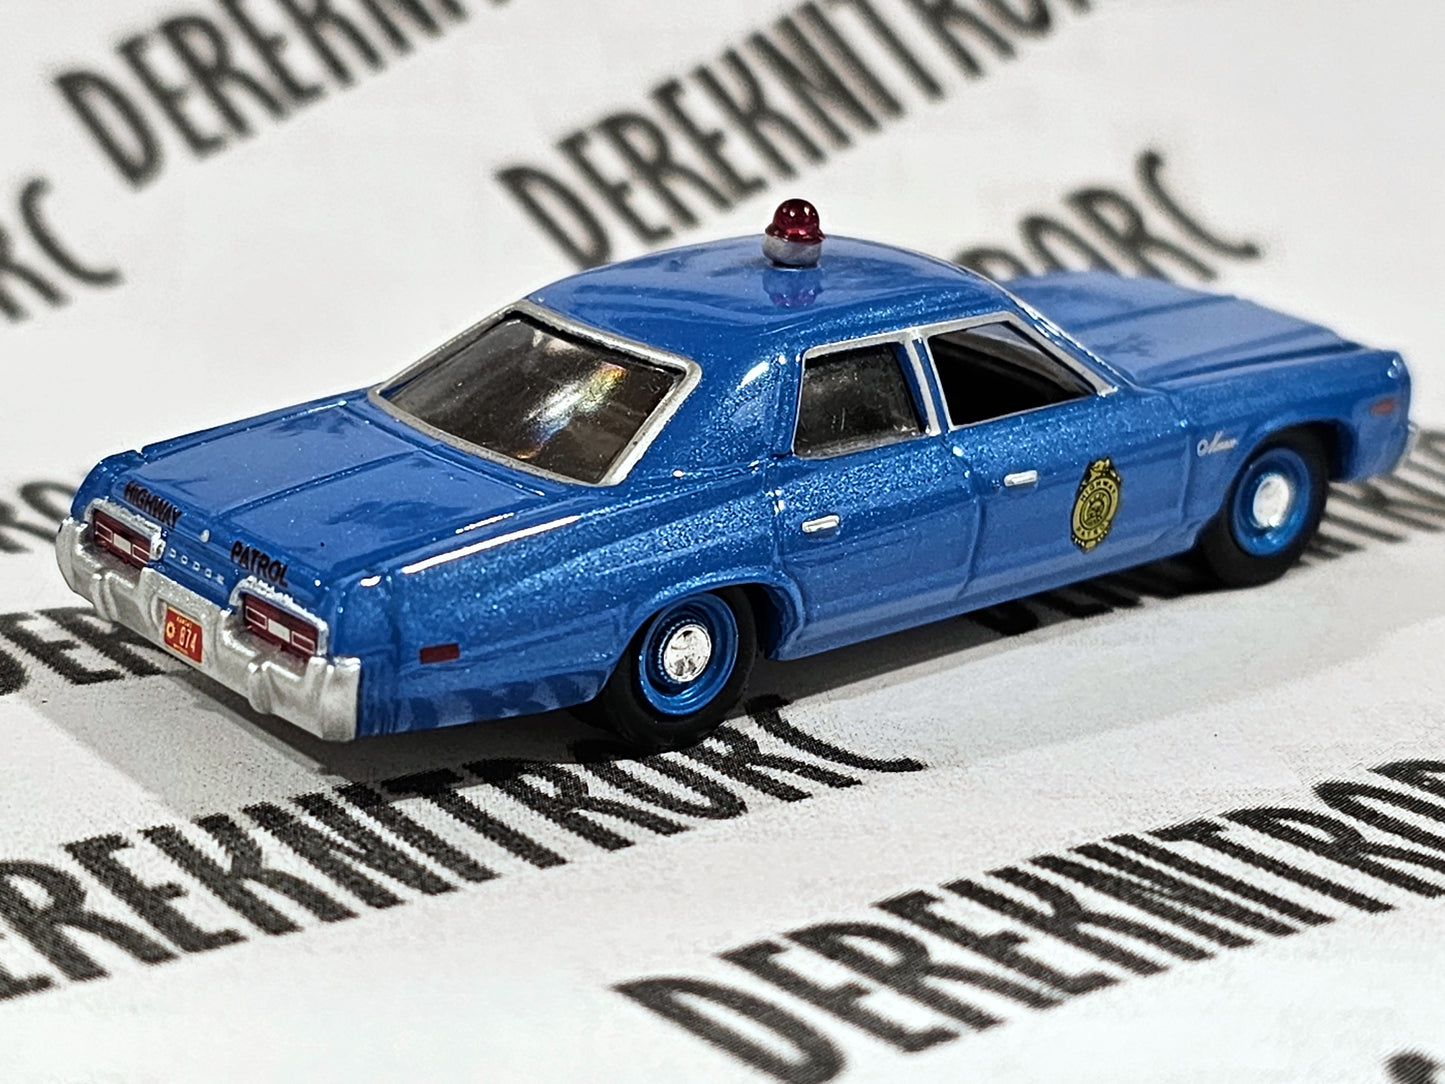 NOT FOR SALE GreenLight Collectibles Deco Sample 1975 Dodge Monaco Hot Pursuit Series 15